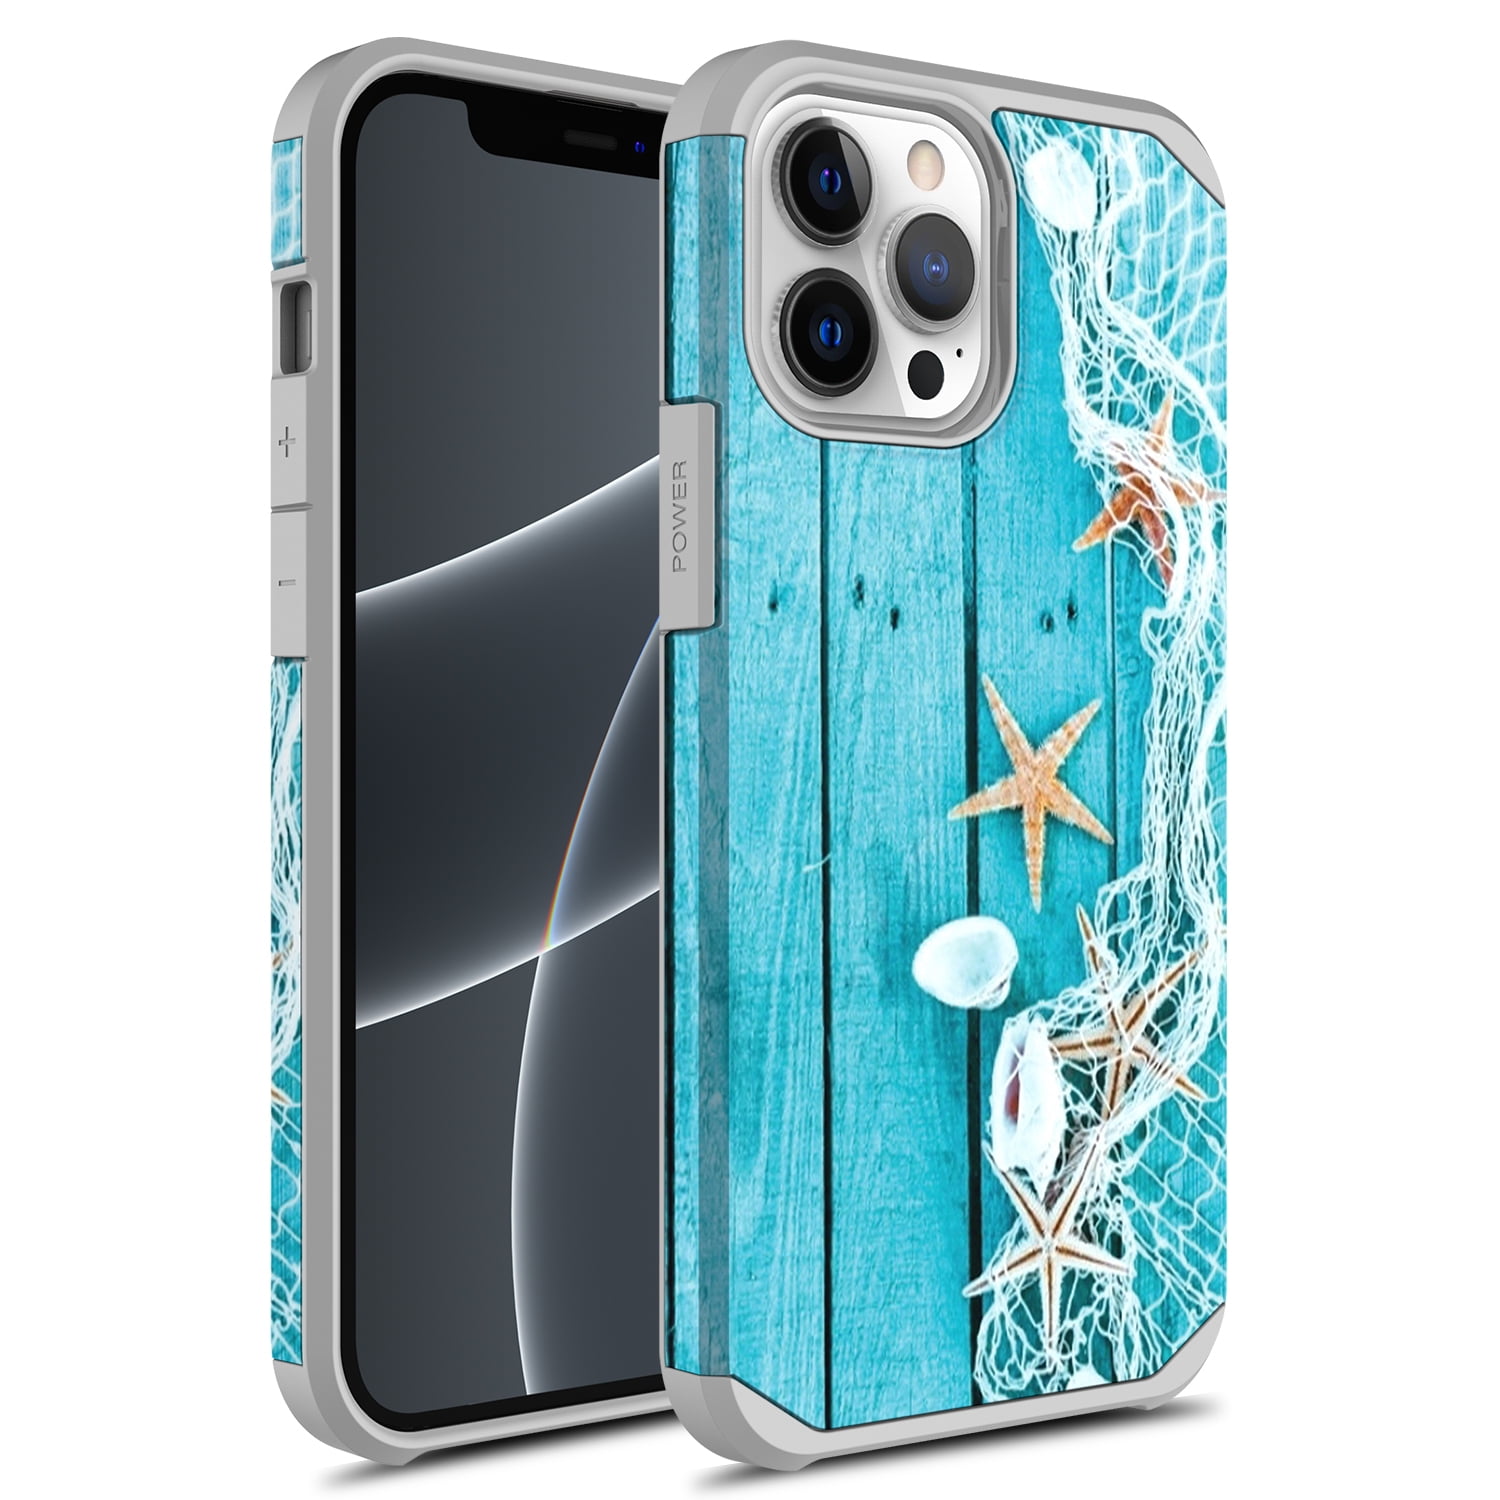 iPhone 13 Pro Max Case, Rosebono Slim Hybrid Shockproof Hard Cover Graphic  Fashion Colorful Skin Cover Armor Case for iPhone 13 Pro Max 6.7  (Starfish) 